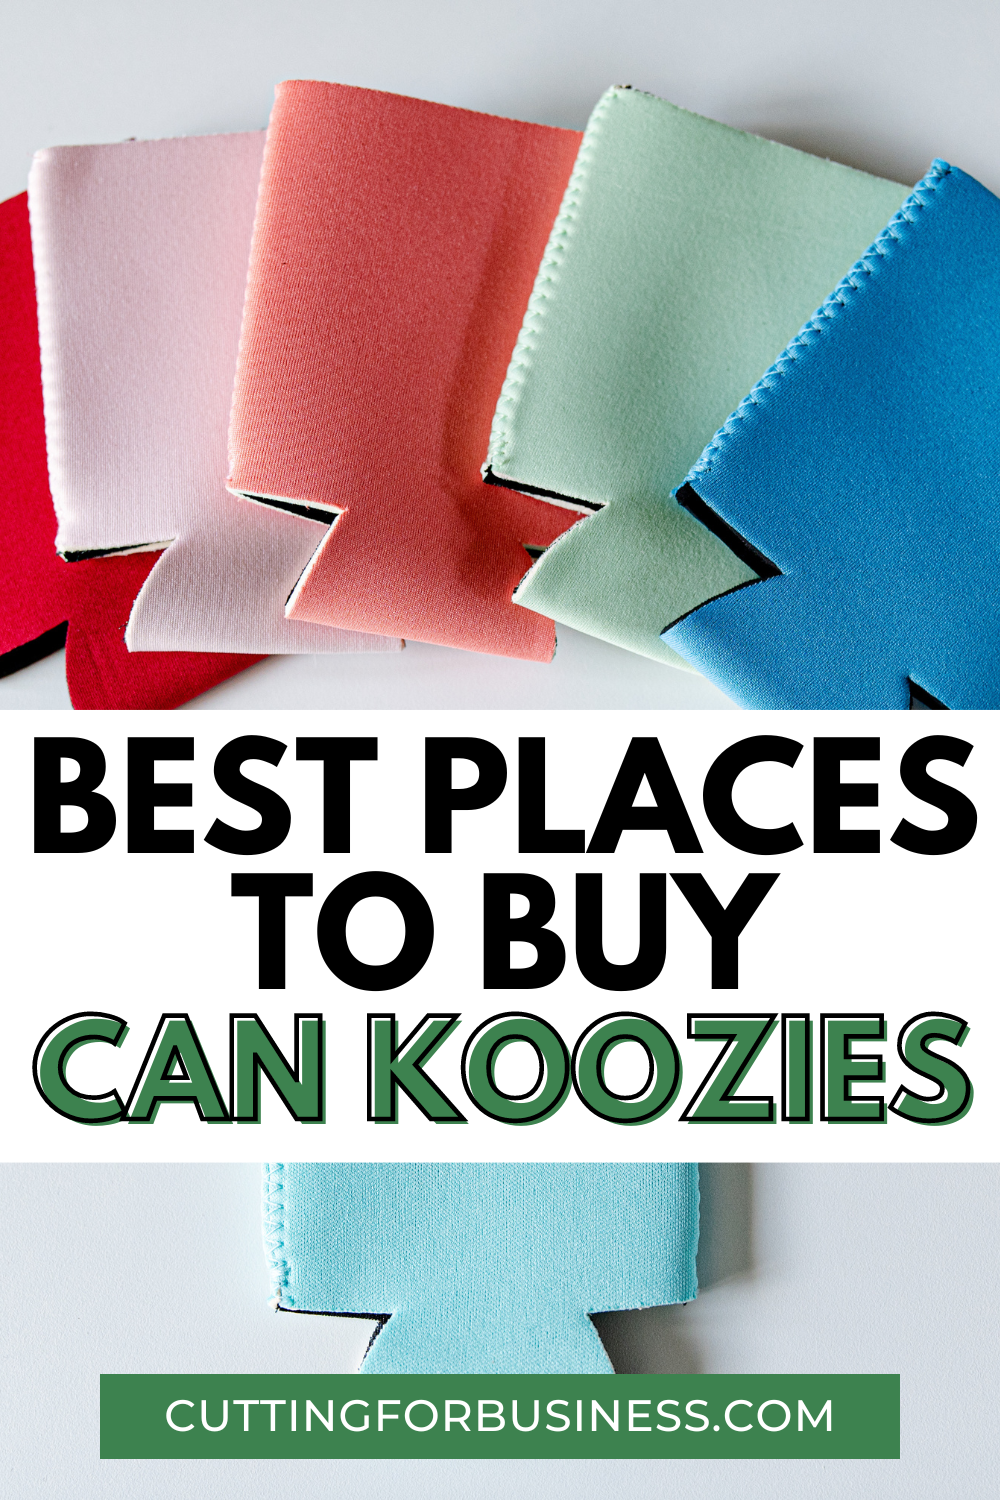 4 Best Places to Buy Blank Can Koozies - cuttingforbusiness.com.